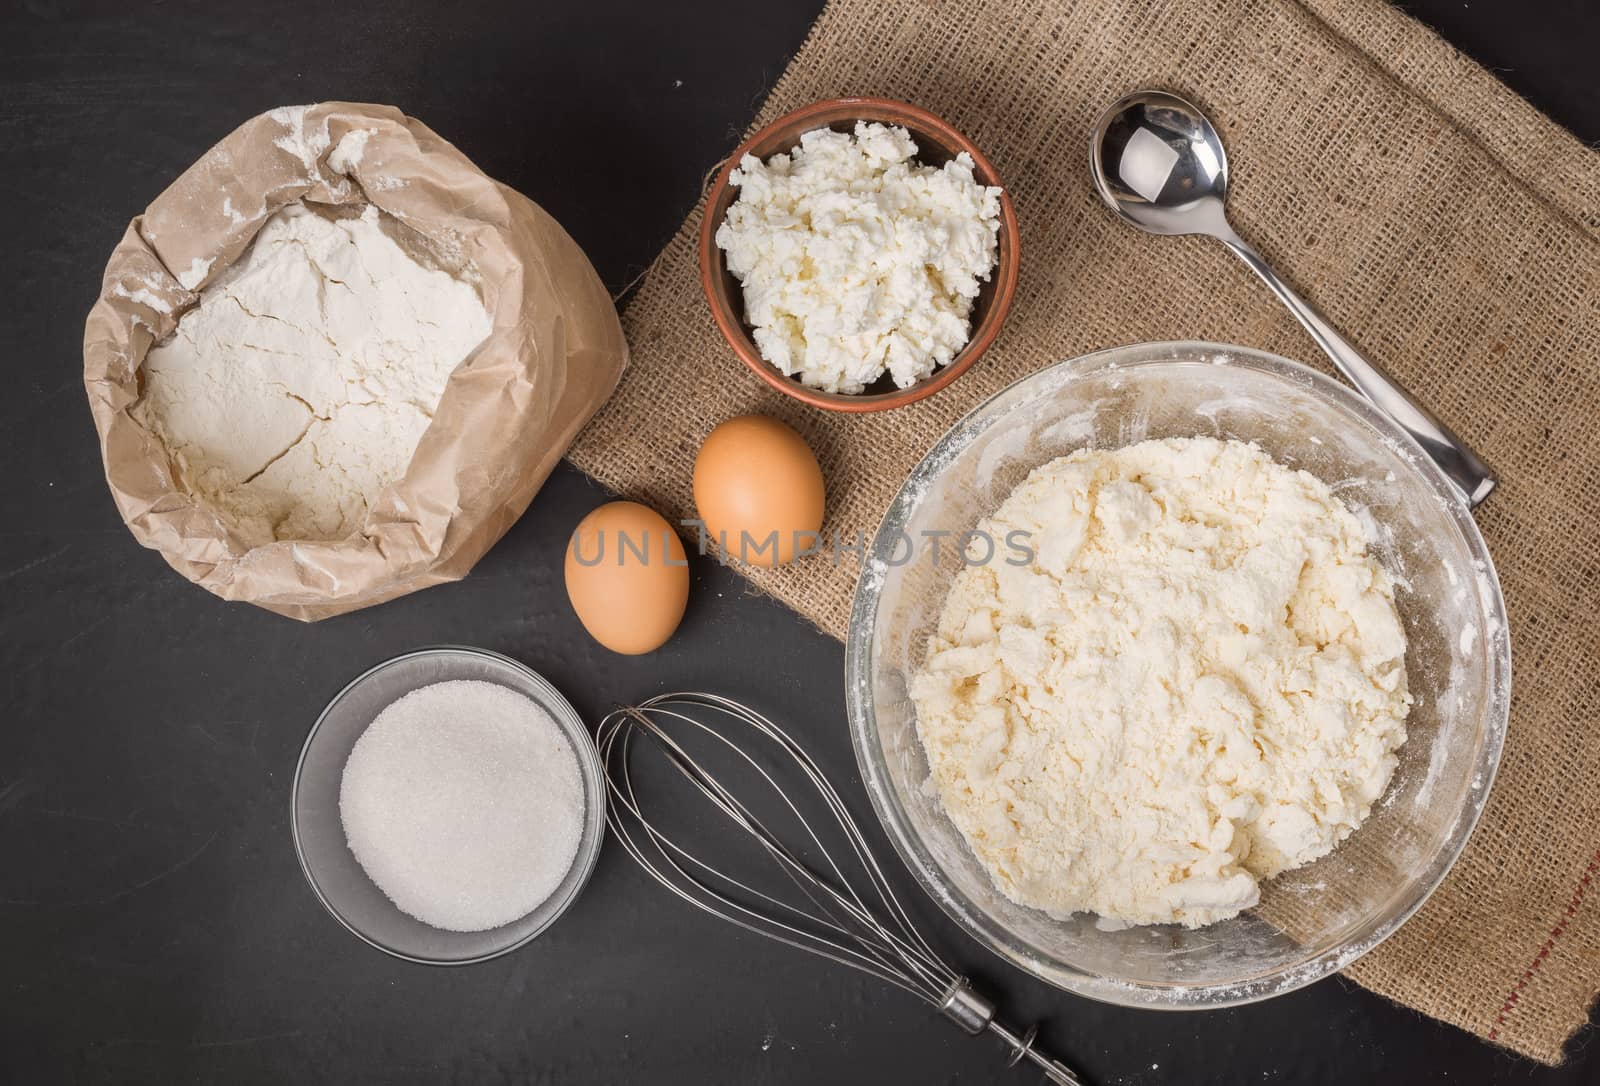 The ingredients for homemade baking cheesecake, a wheat flour in a paper bag, two eggs, sugar in a bowl, whisk and a spoon on sackcloth, top view